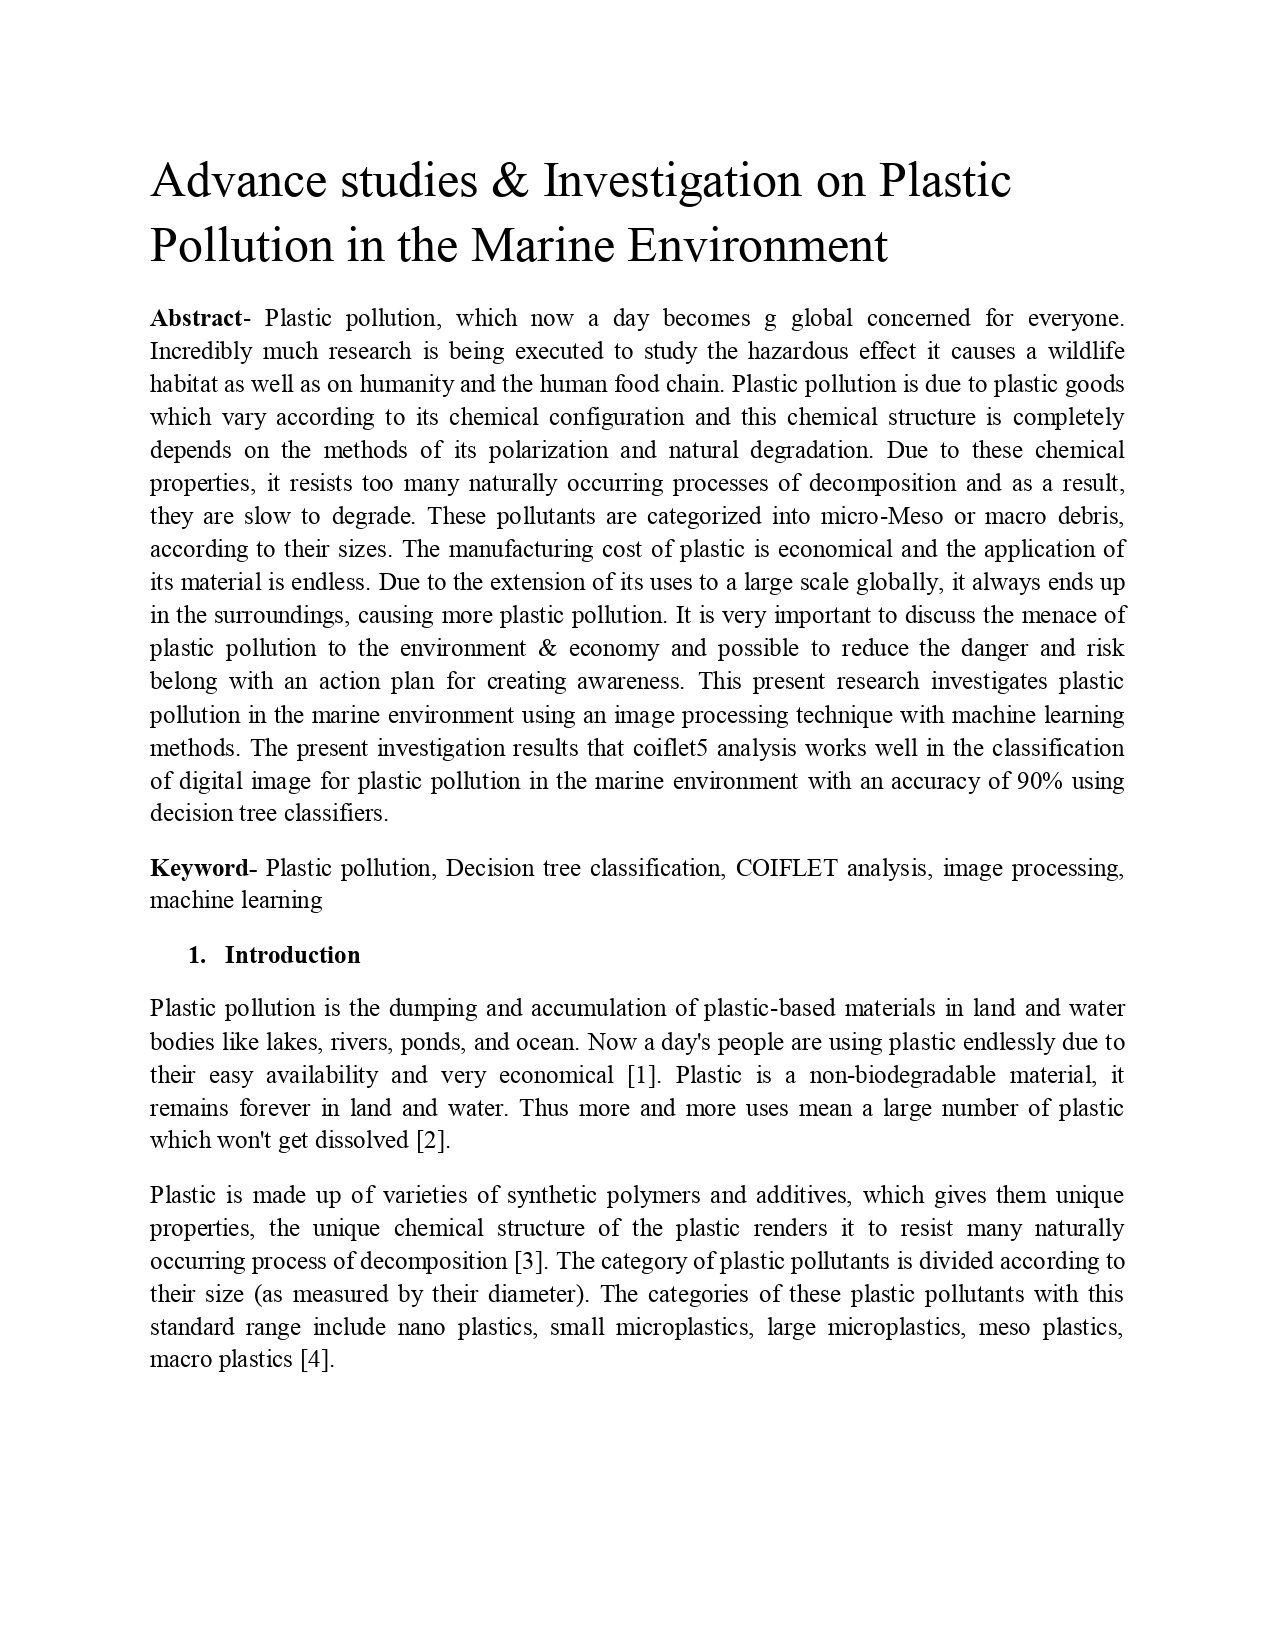 pollution research paper